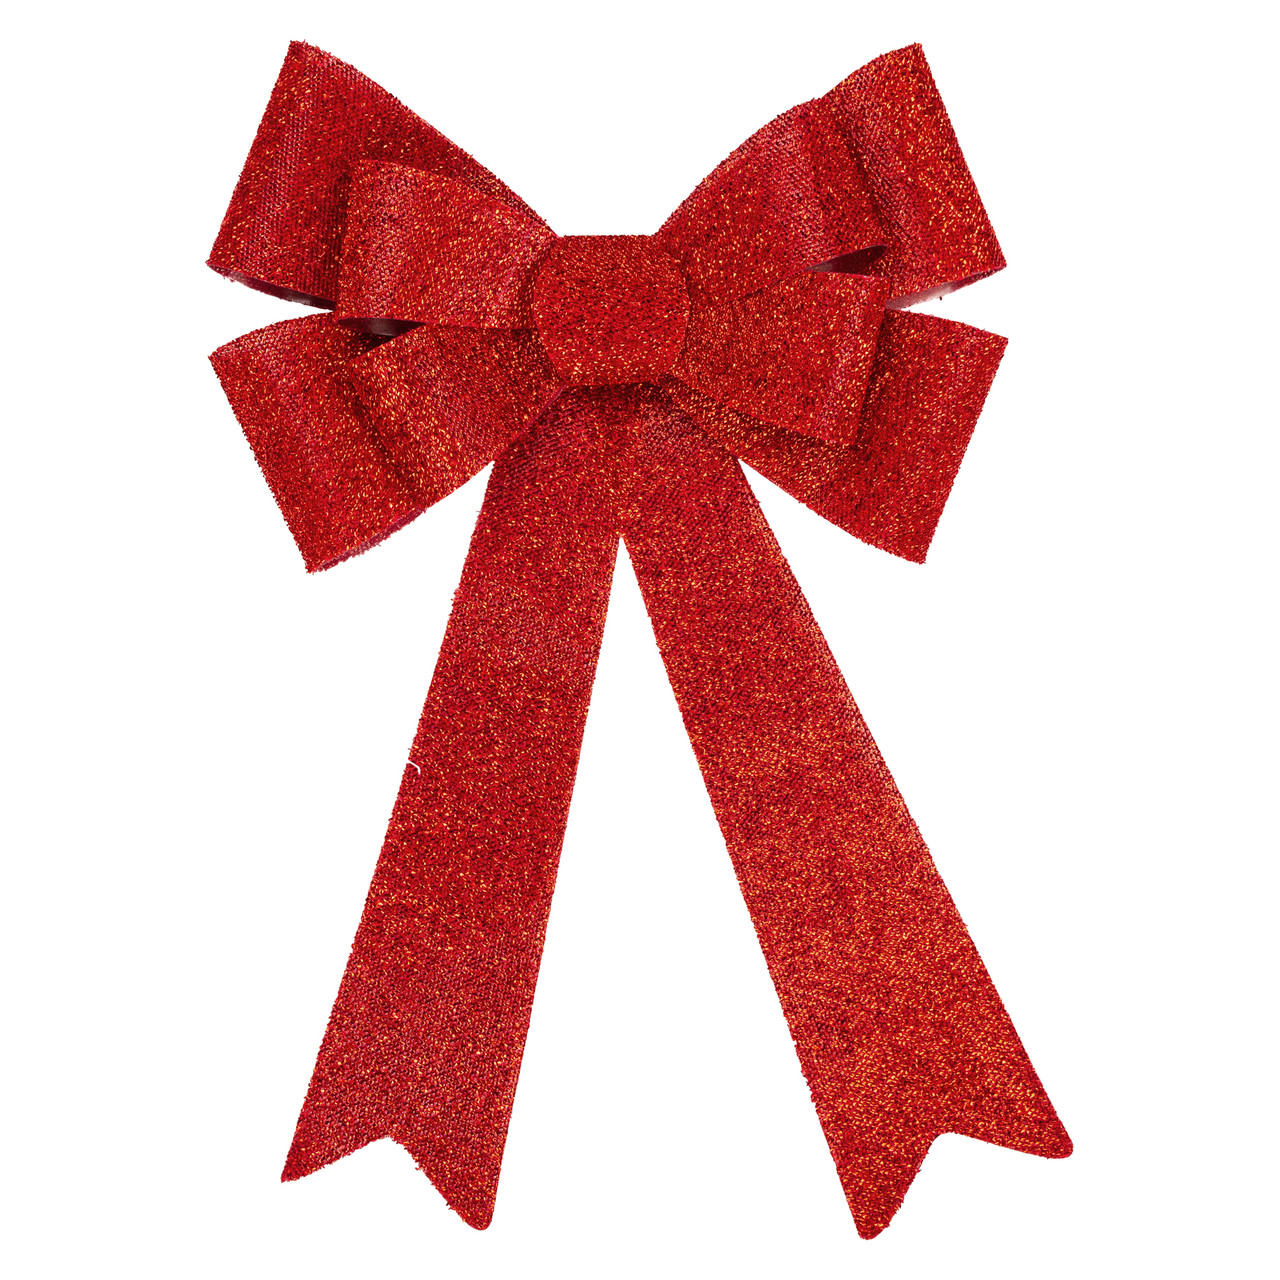 Red Ribbon Bow Large Red Bow Decorative Bows Florist Packing Decor 